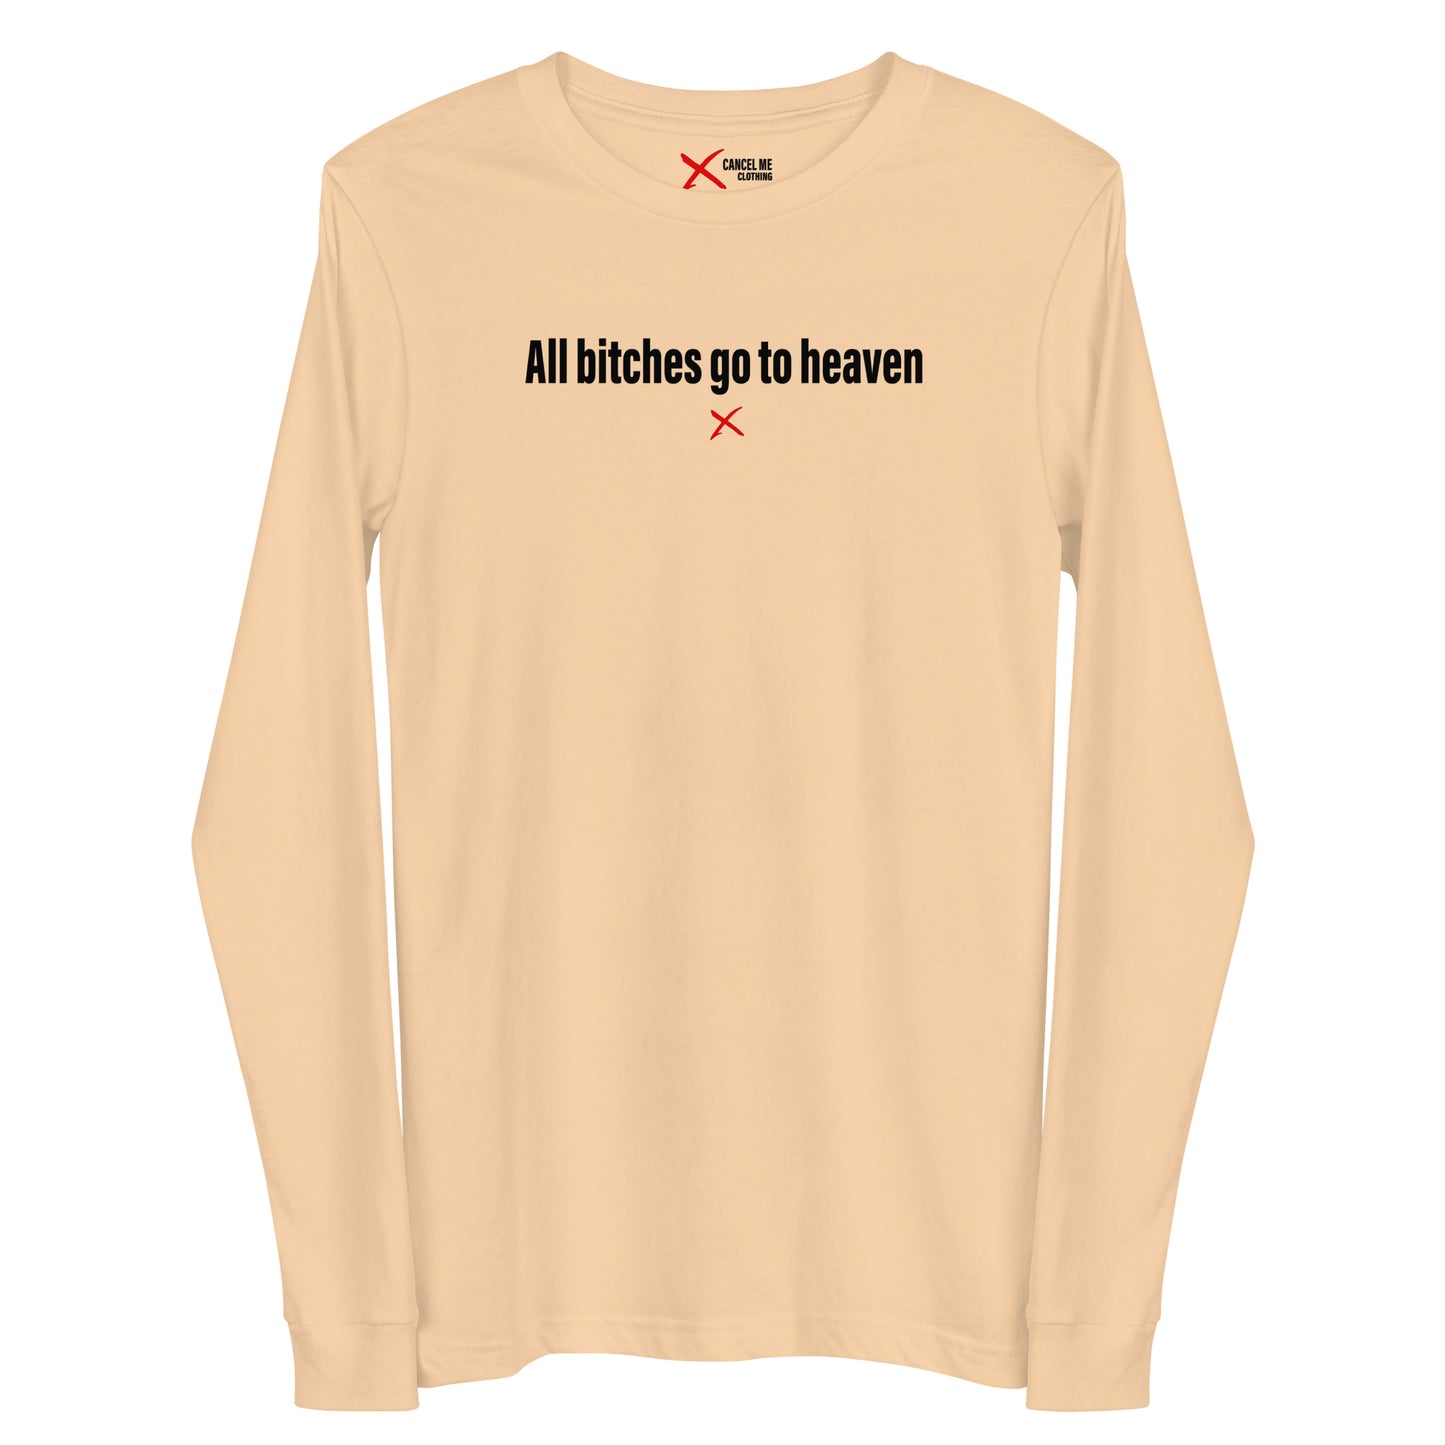 All bitches go to heaven - Longsleeve